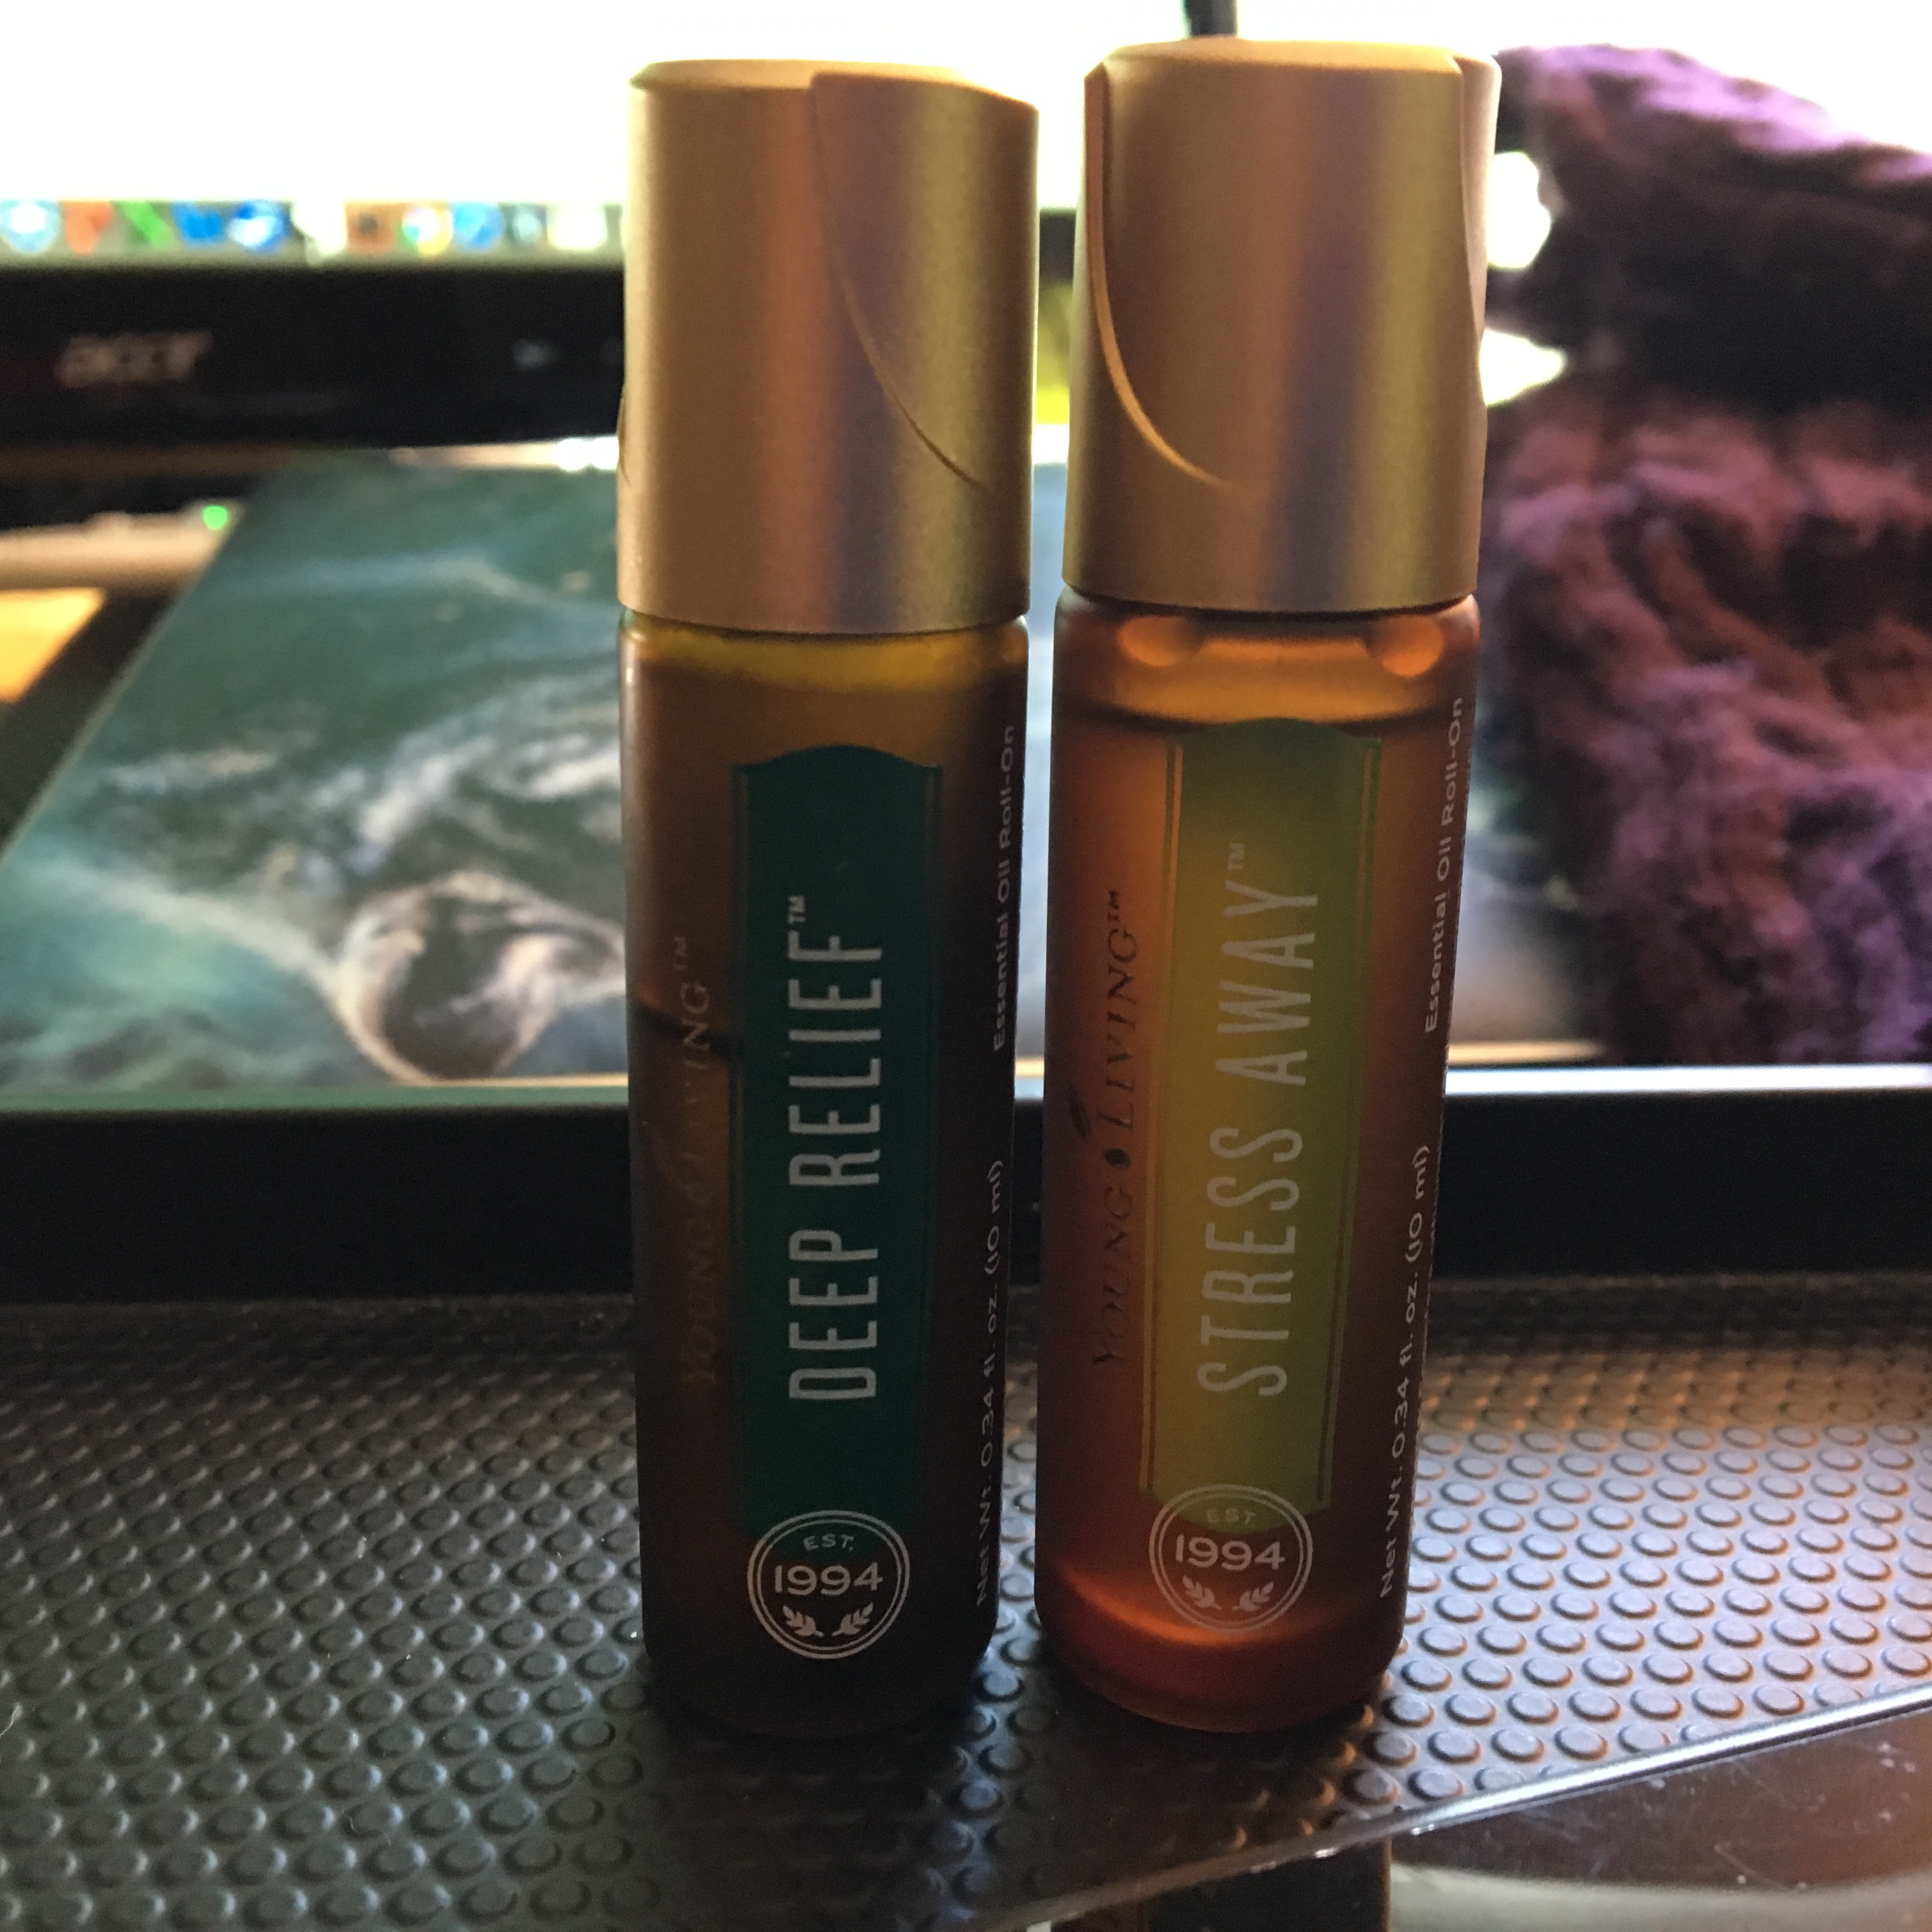 #amediting #editinghell – Essential oils to the rescue.